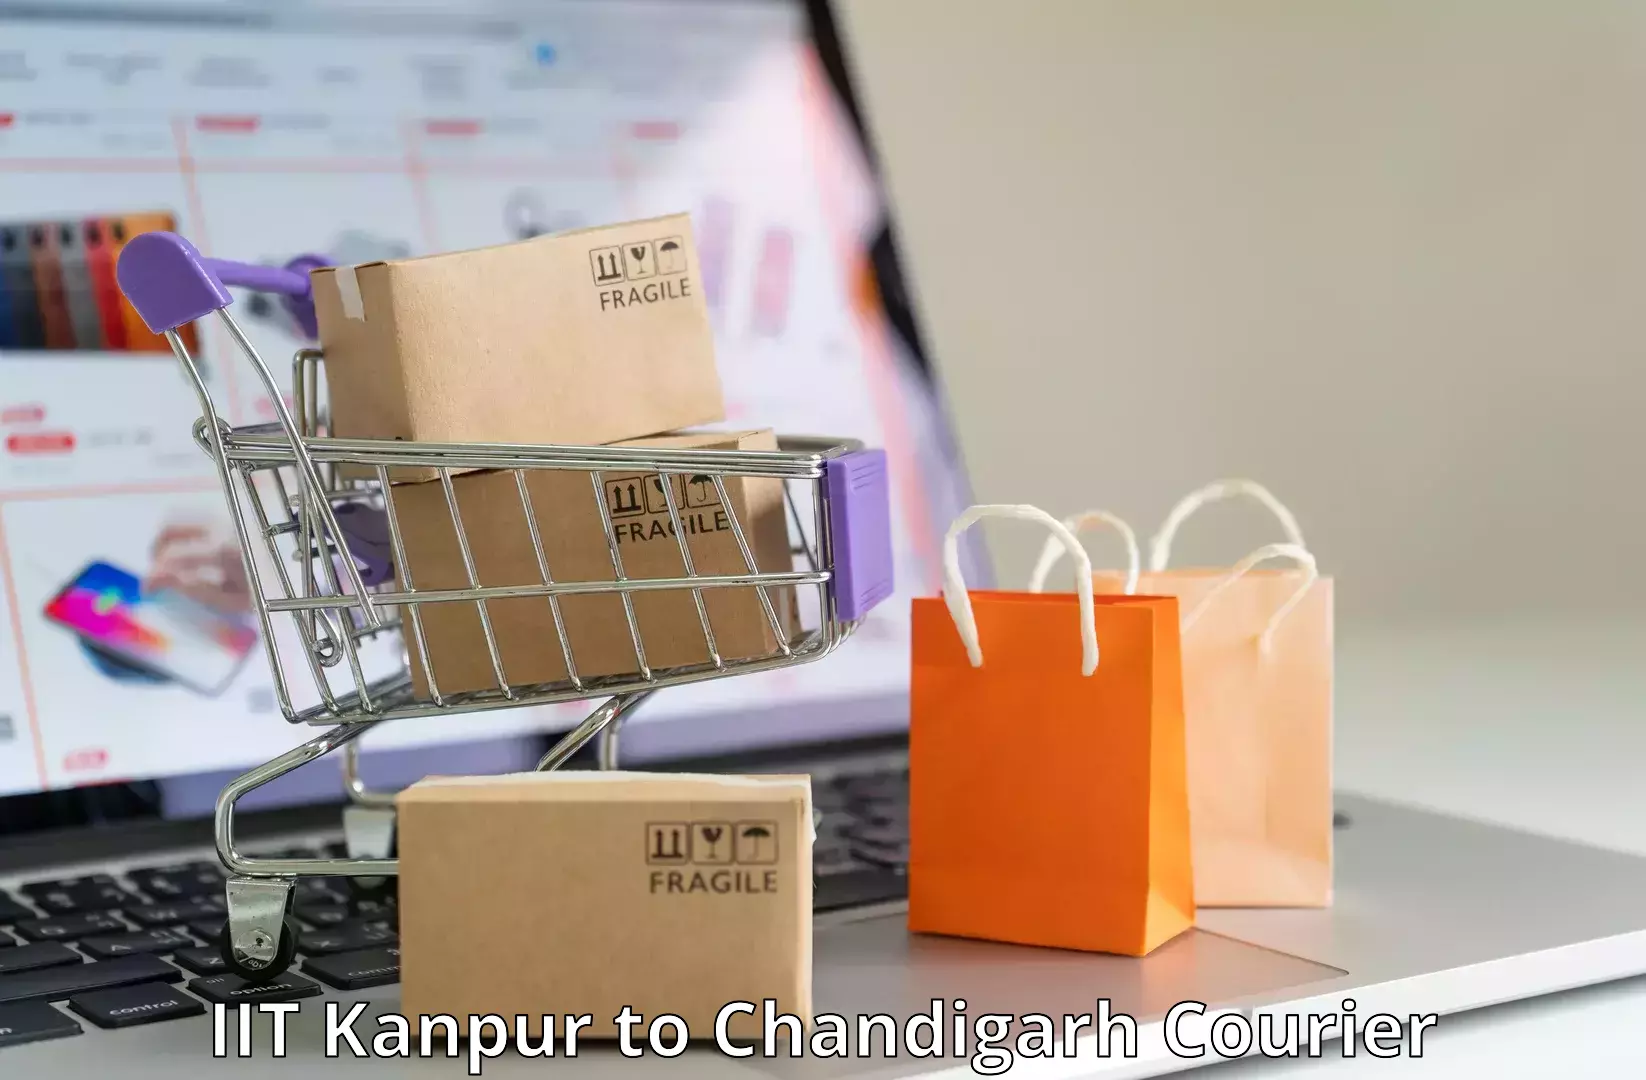 Express delivery capabilities in IIT Kanpur to Chandigarh